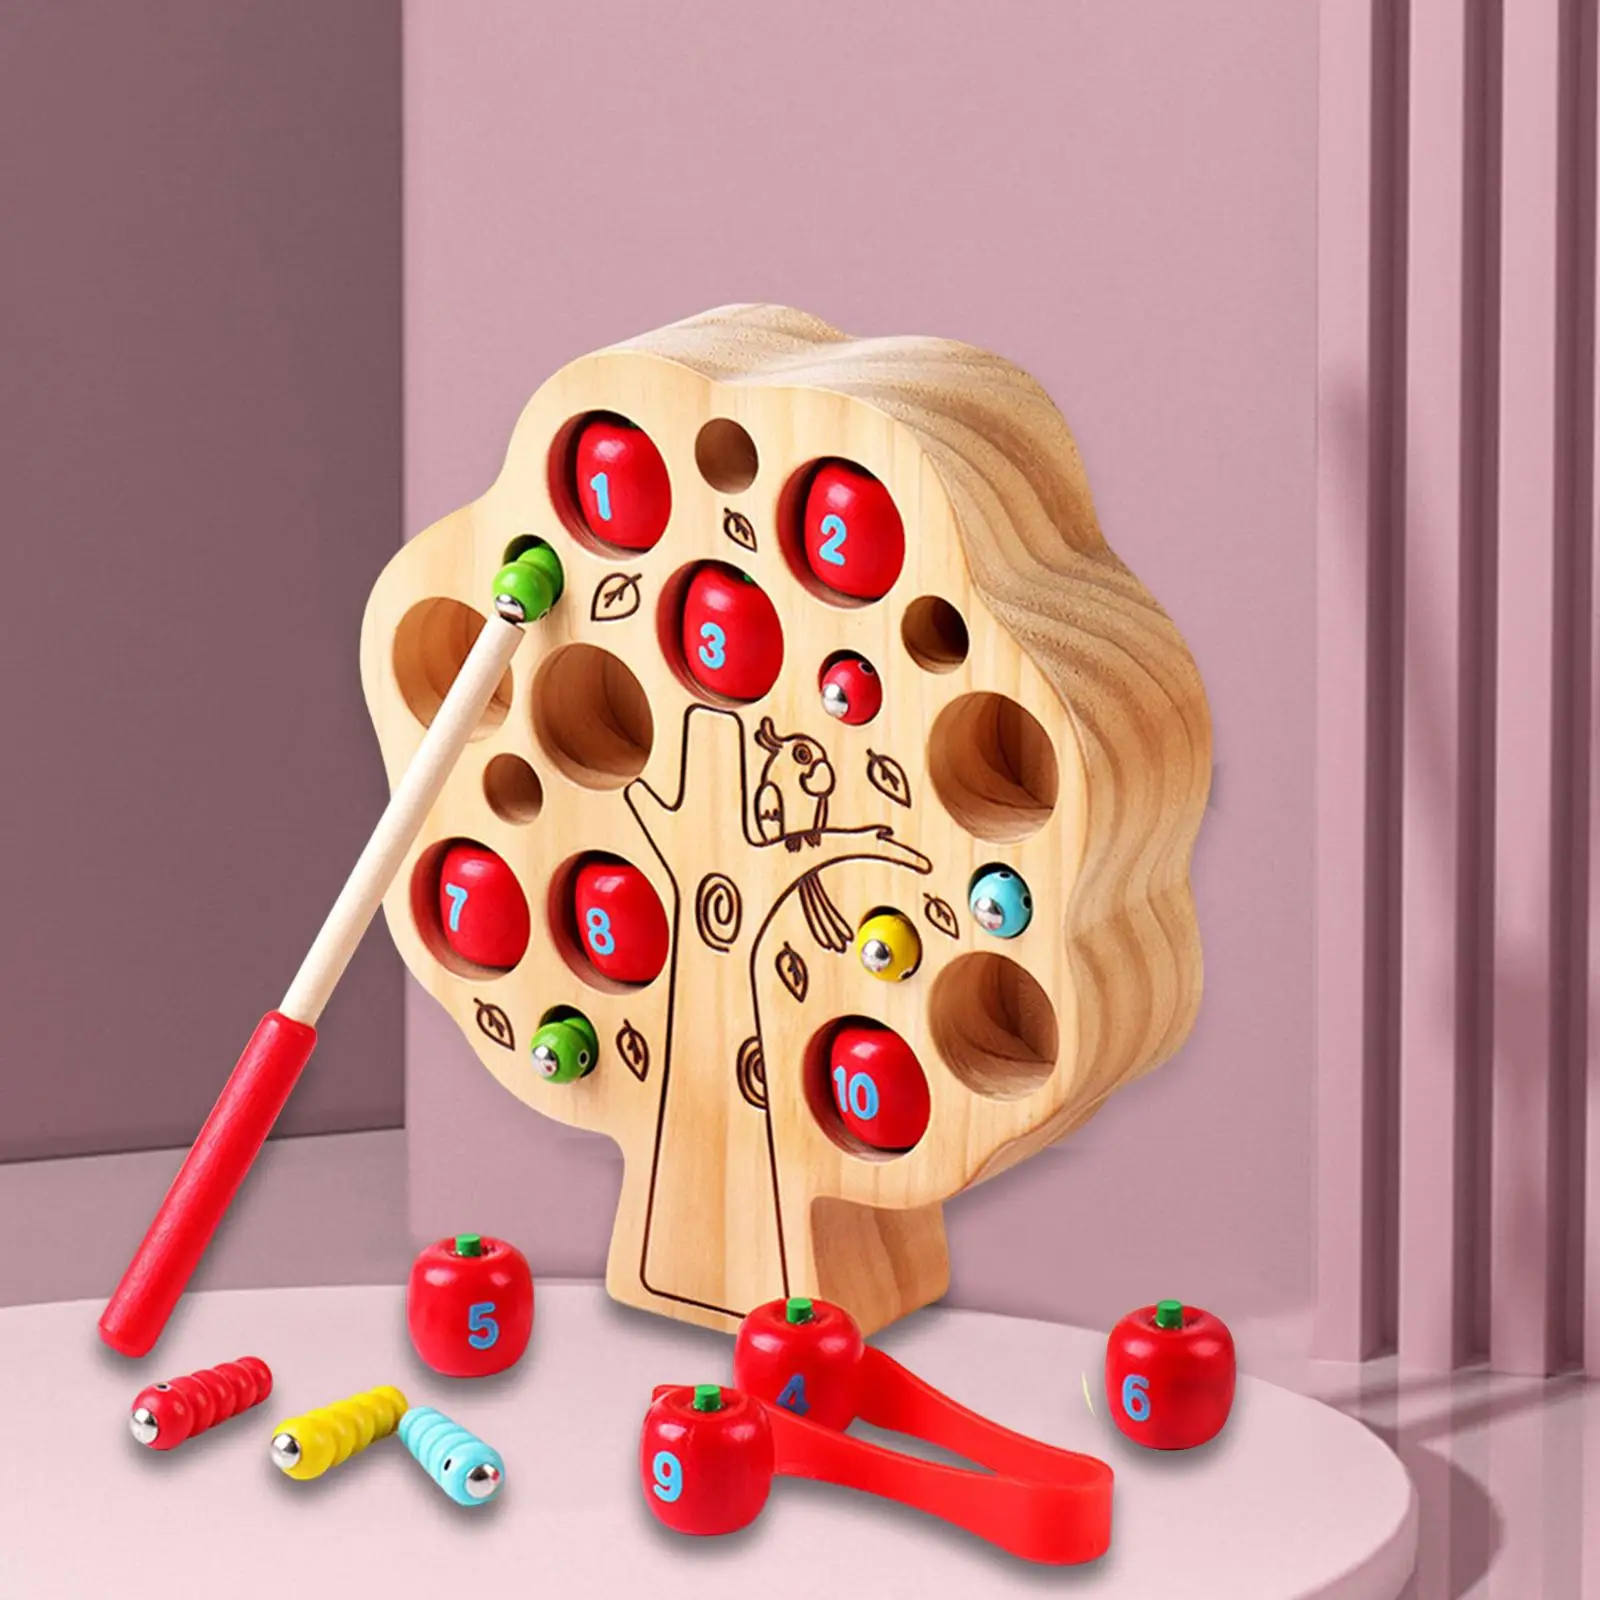 Wood Montessori Color Shape Sorting Puzzle Development Educational Toys Wooden Game Toy for Kids